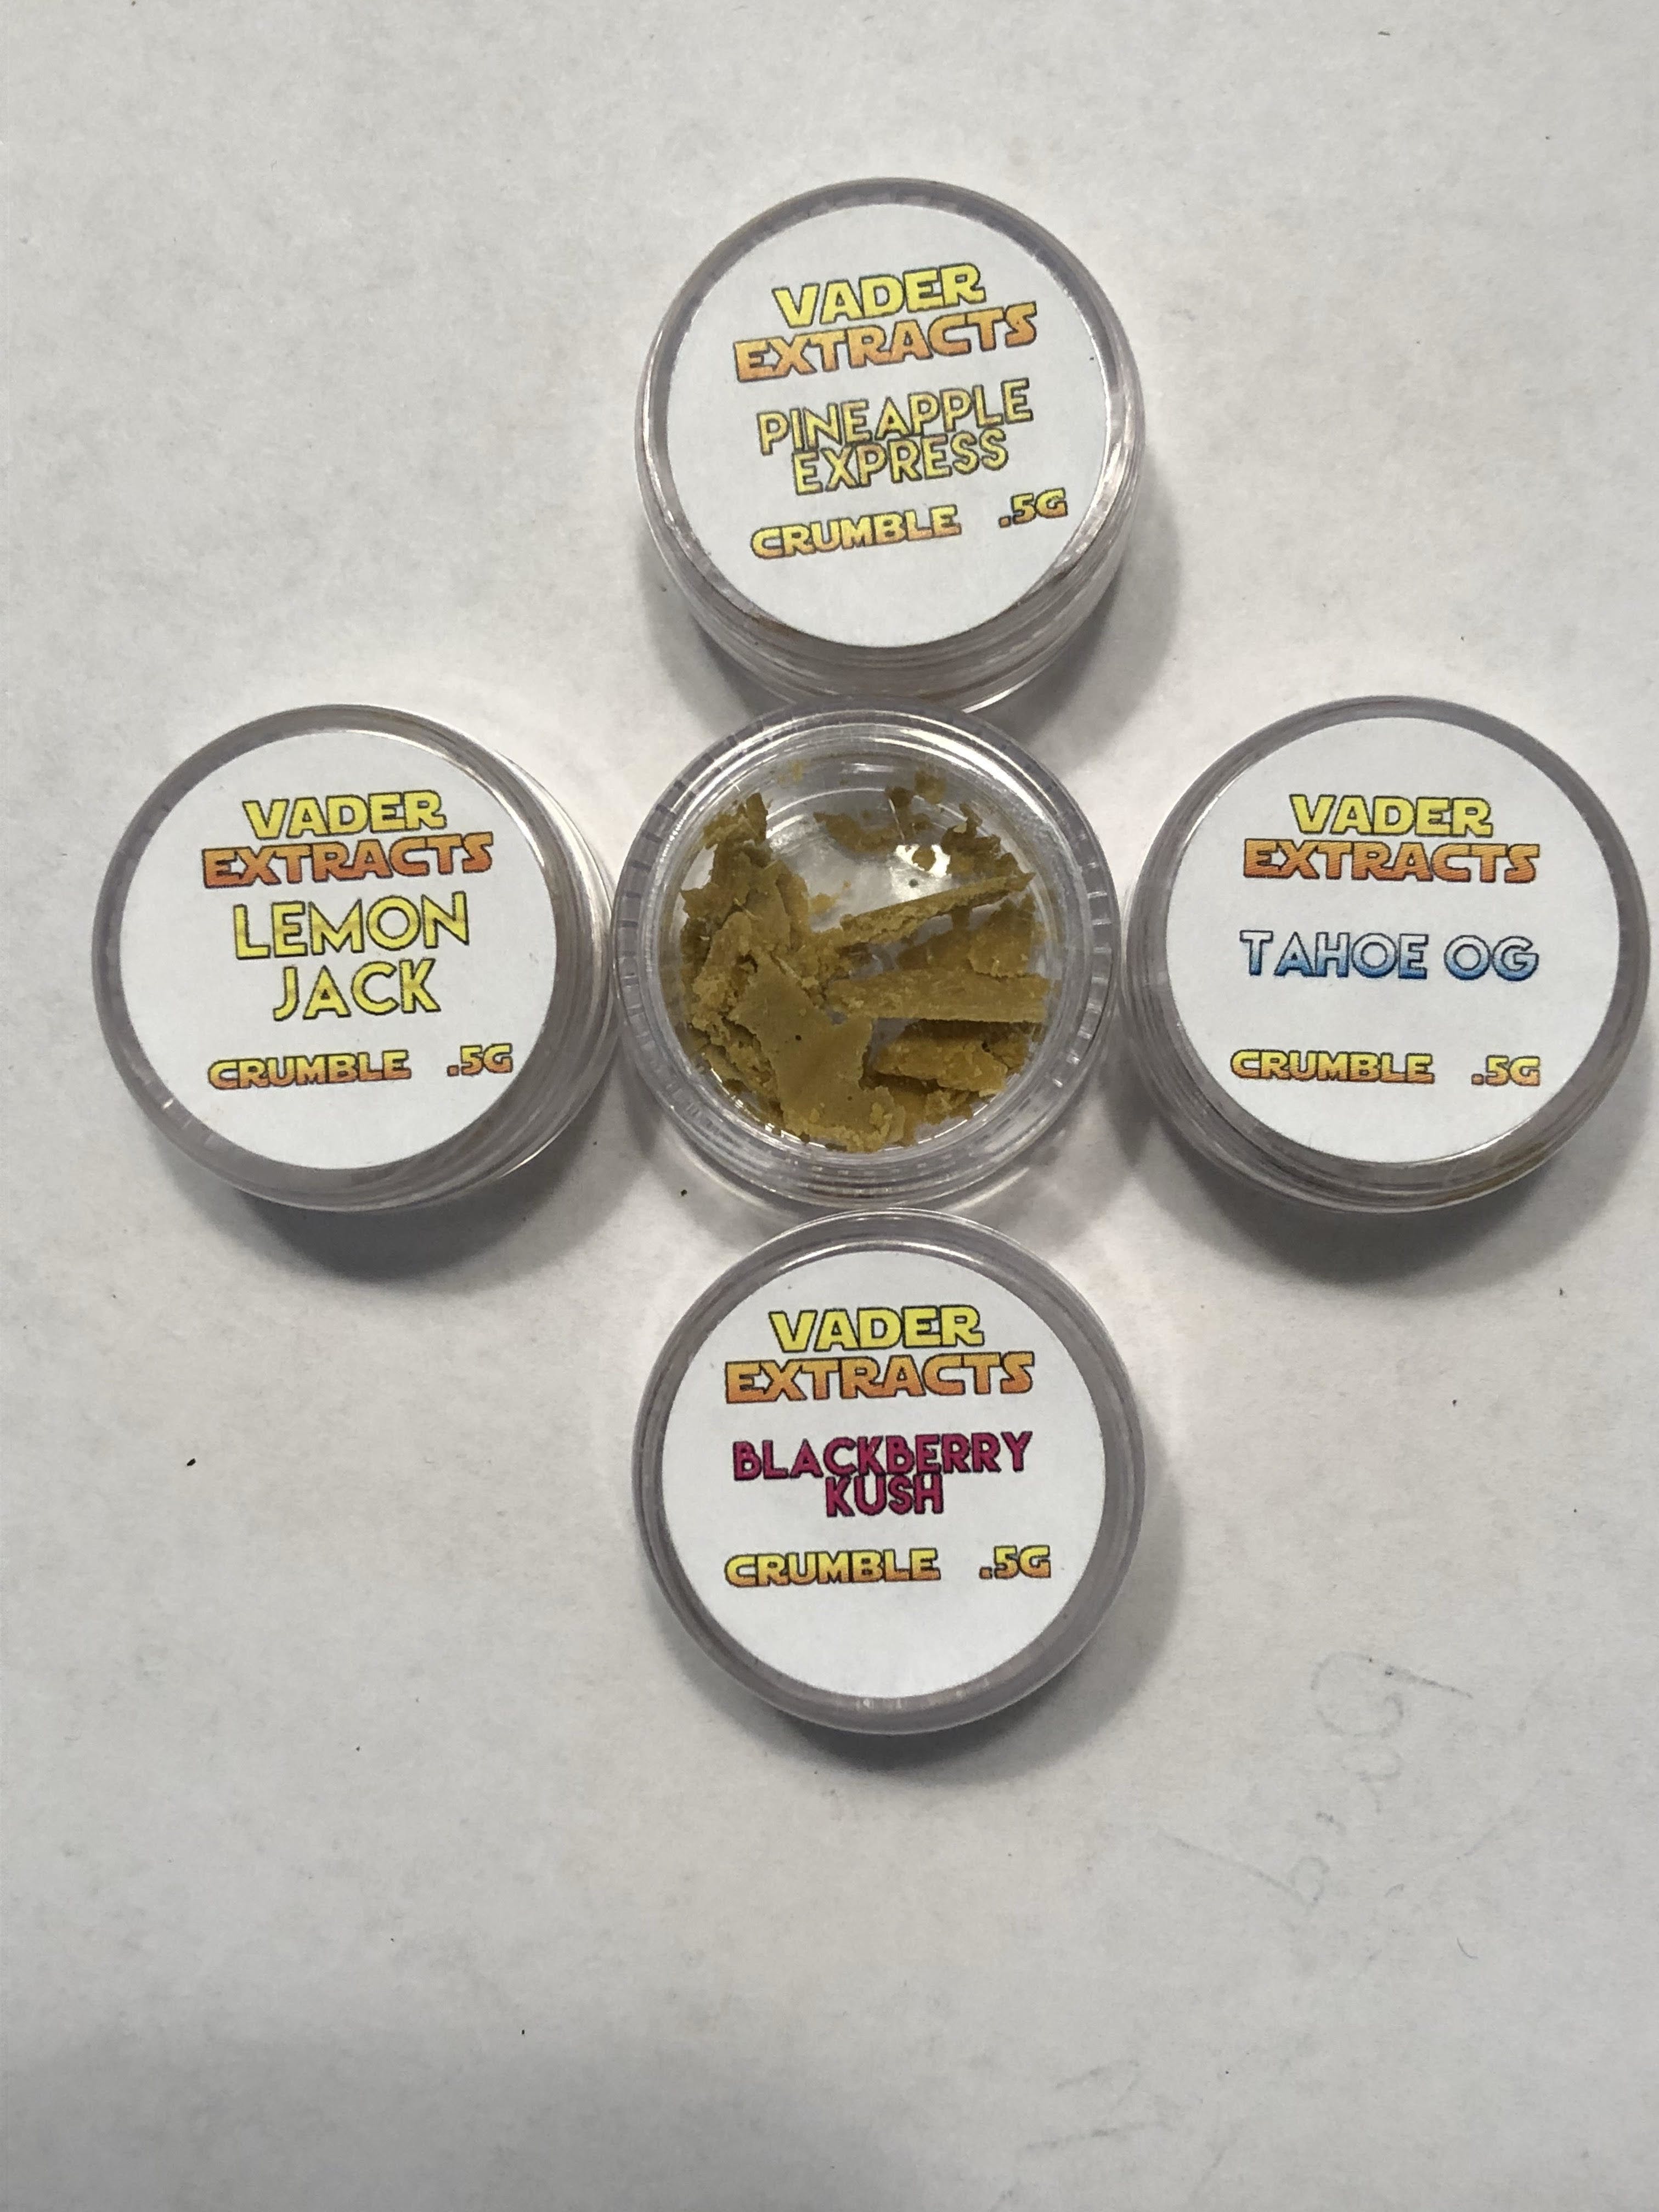 wax-vader-extracts-trim-run-crumble